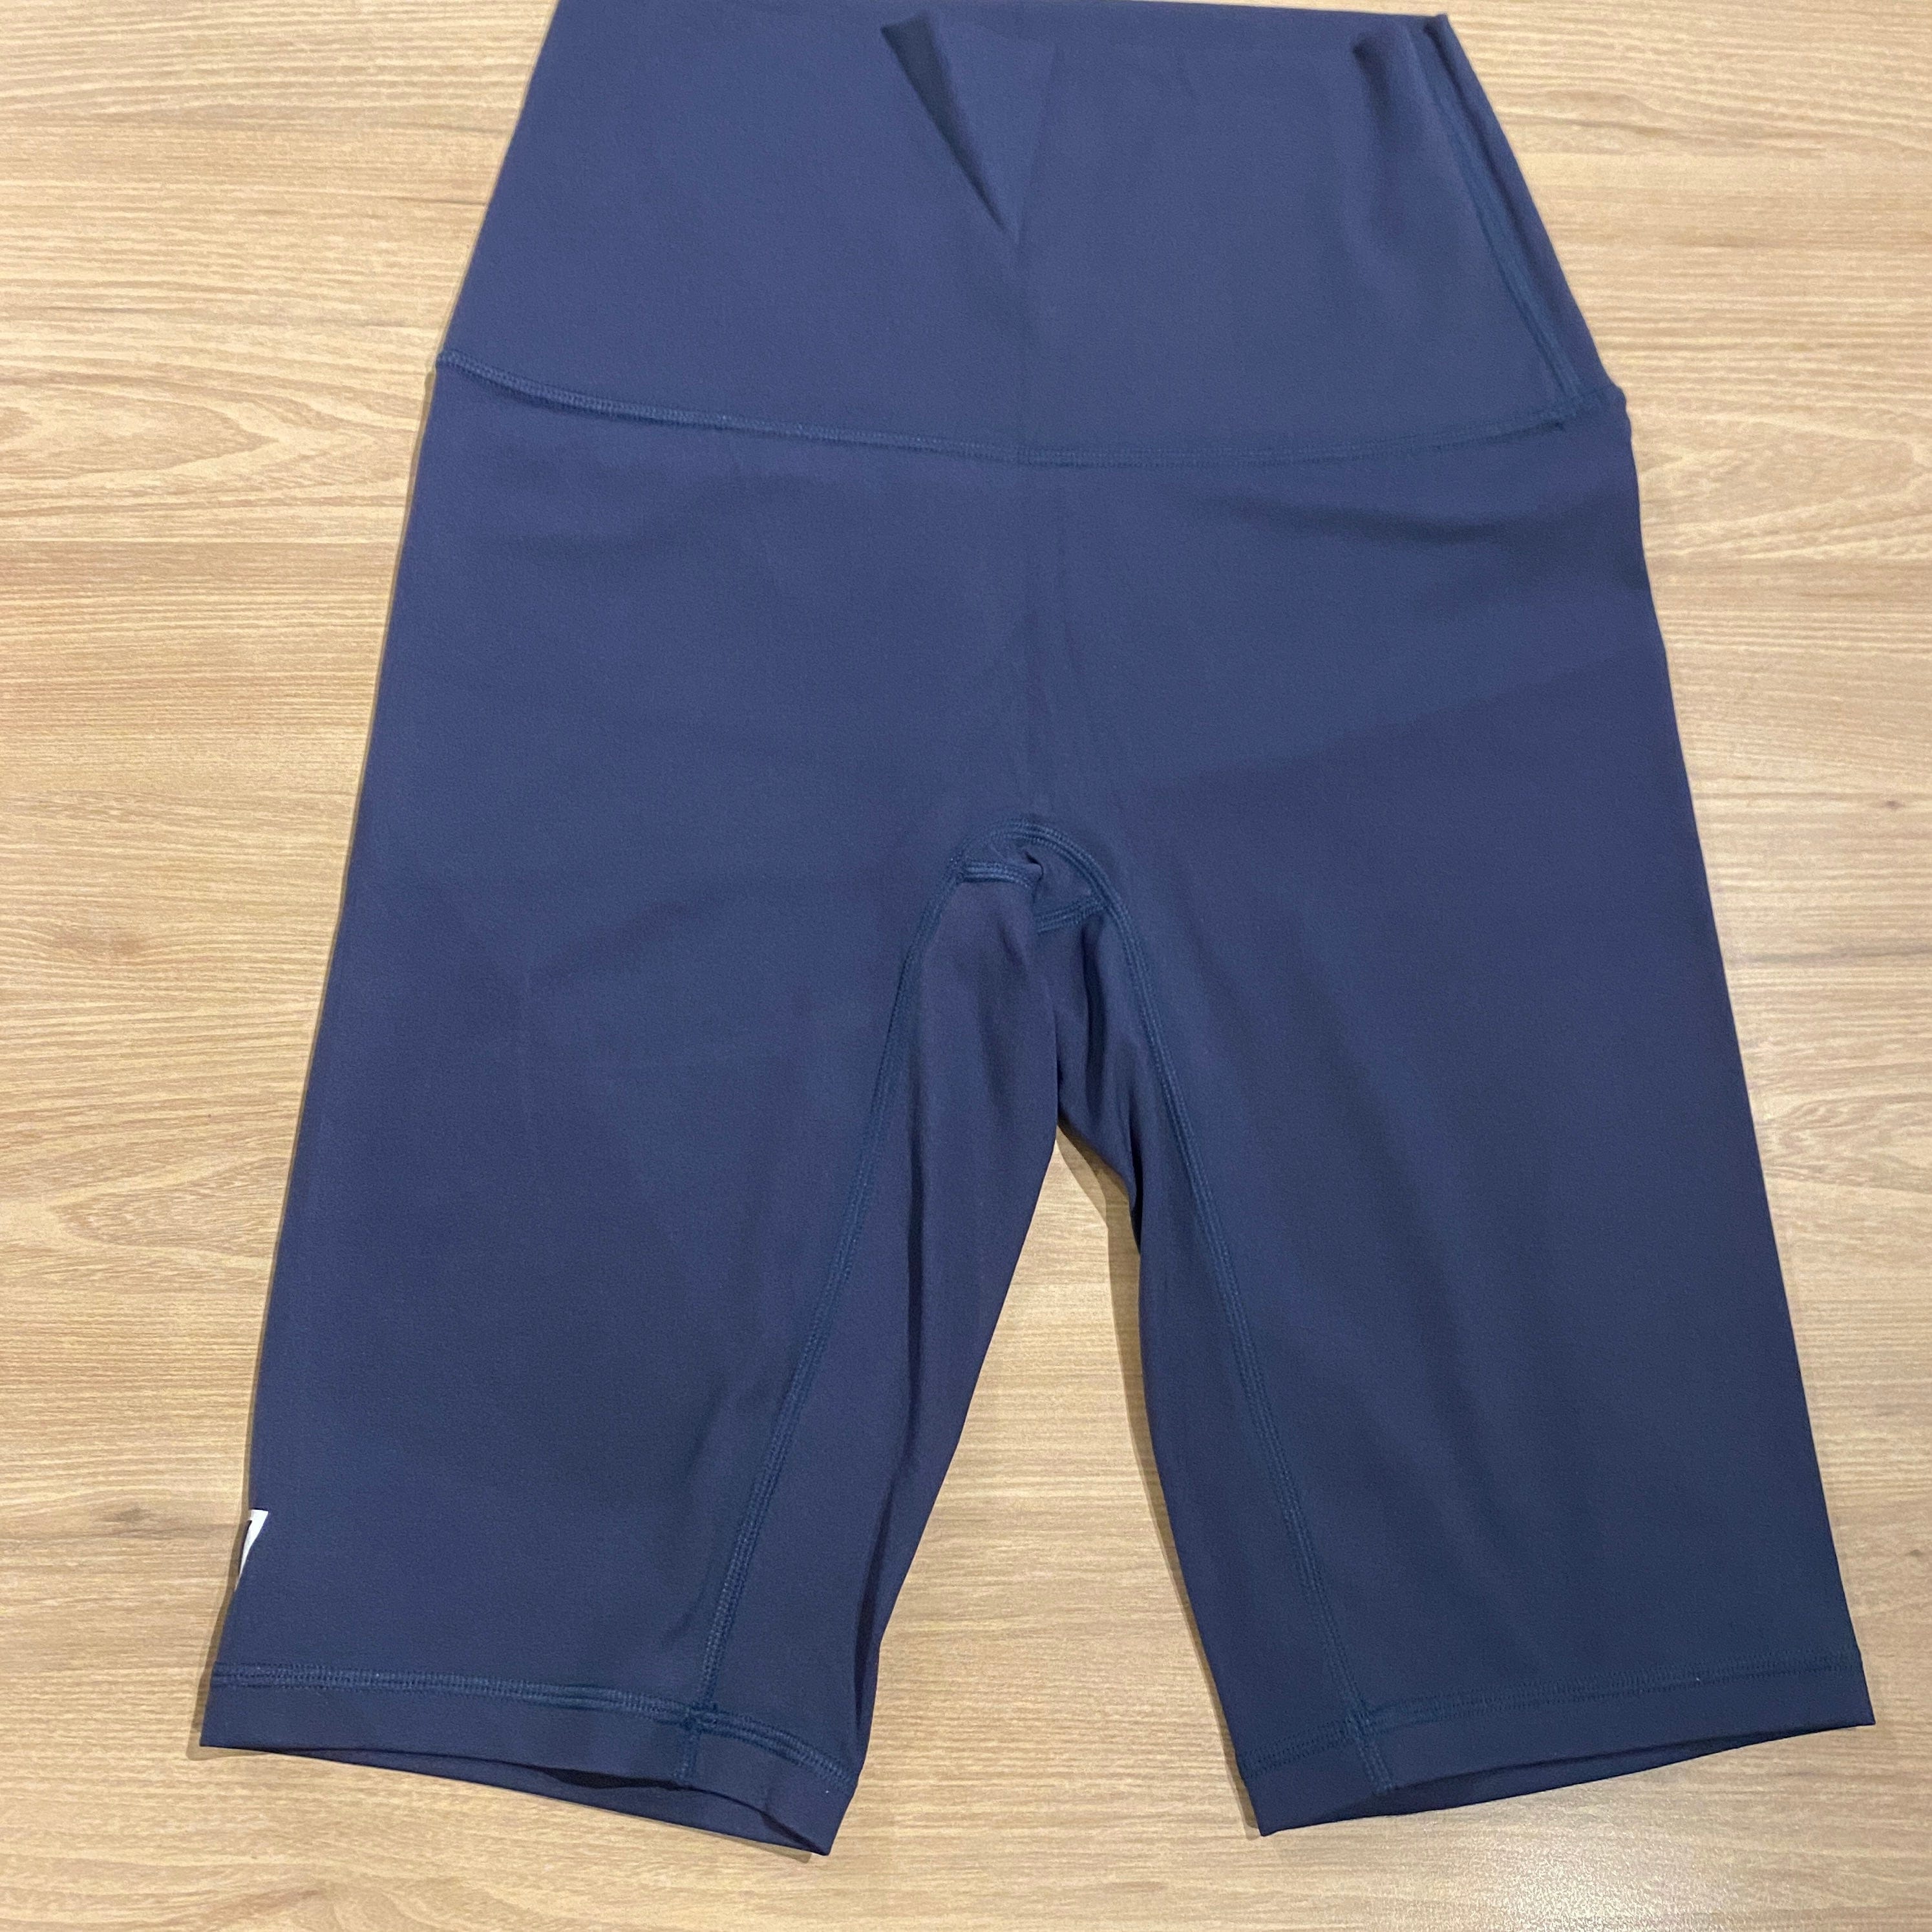 Everyday seamless shorts (9 inch inseam) covers thigh